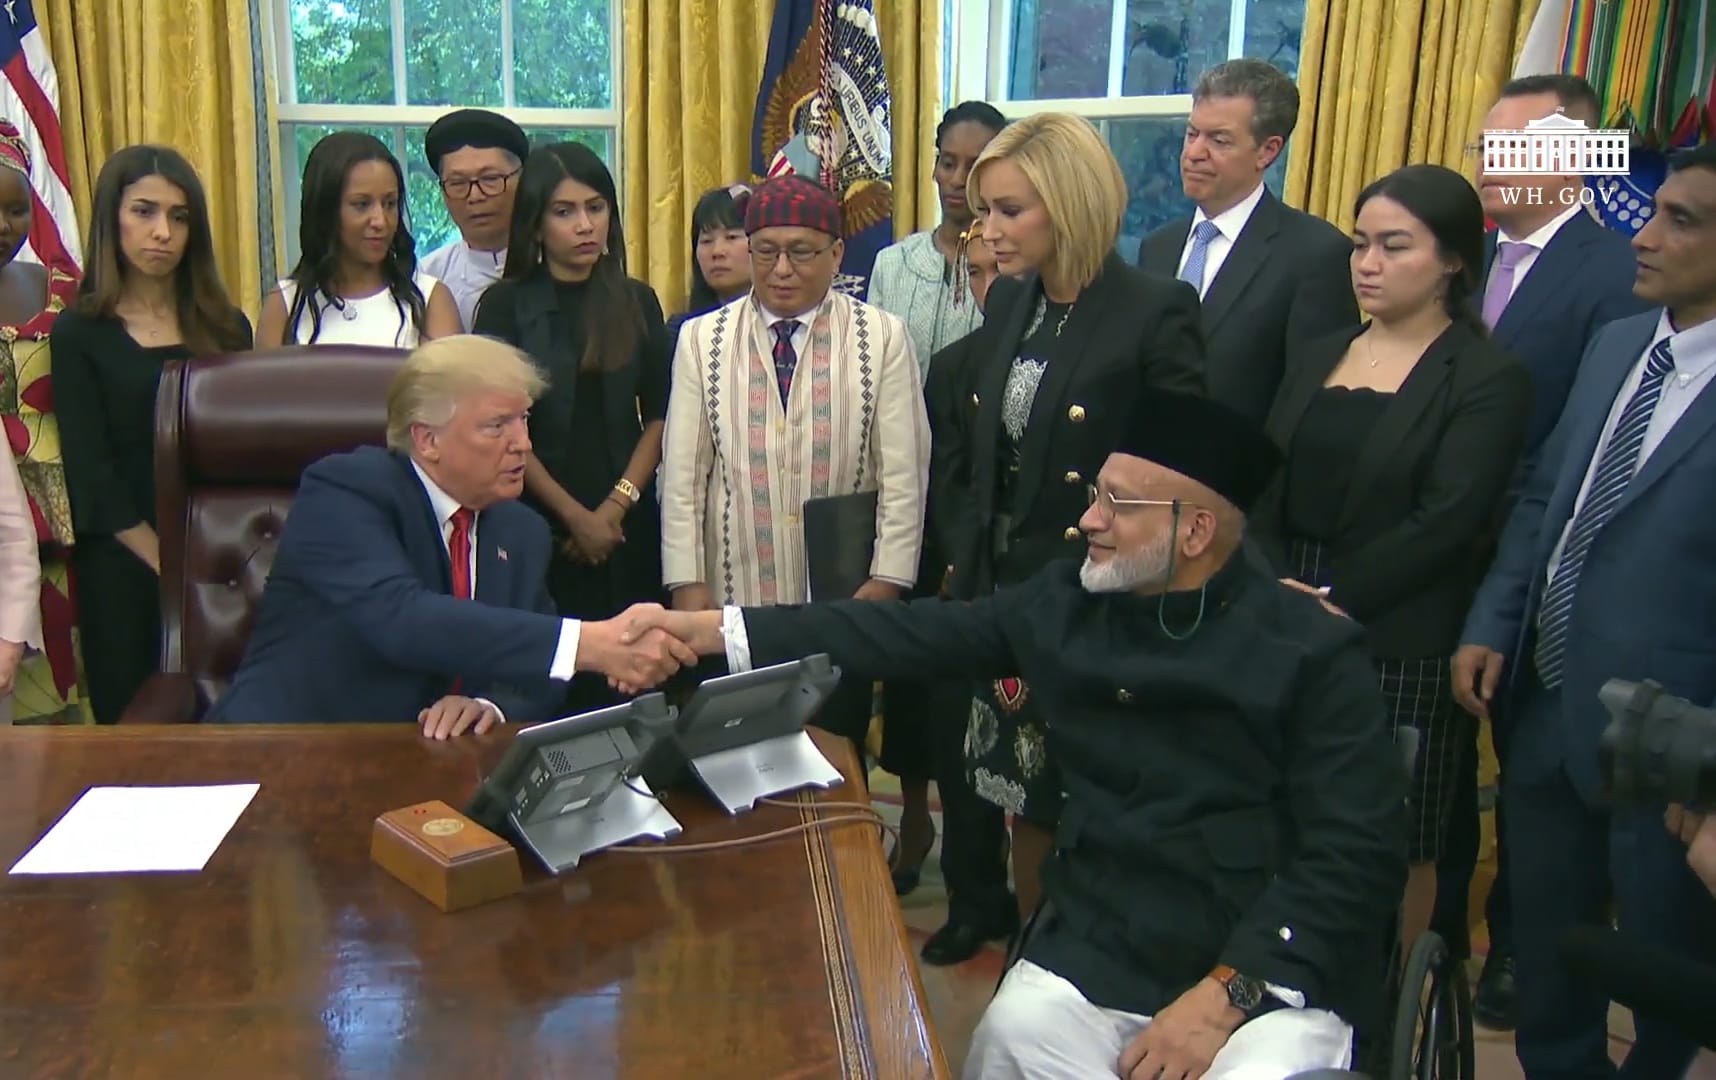 US President Donald Trump meeting with Christchurch mosque shooting survivor Farid Ahmed.